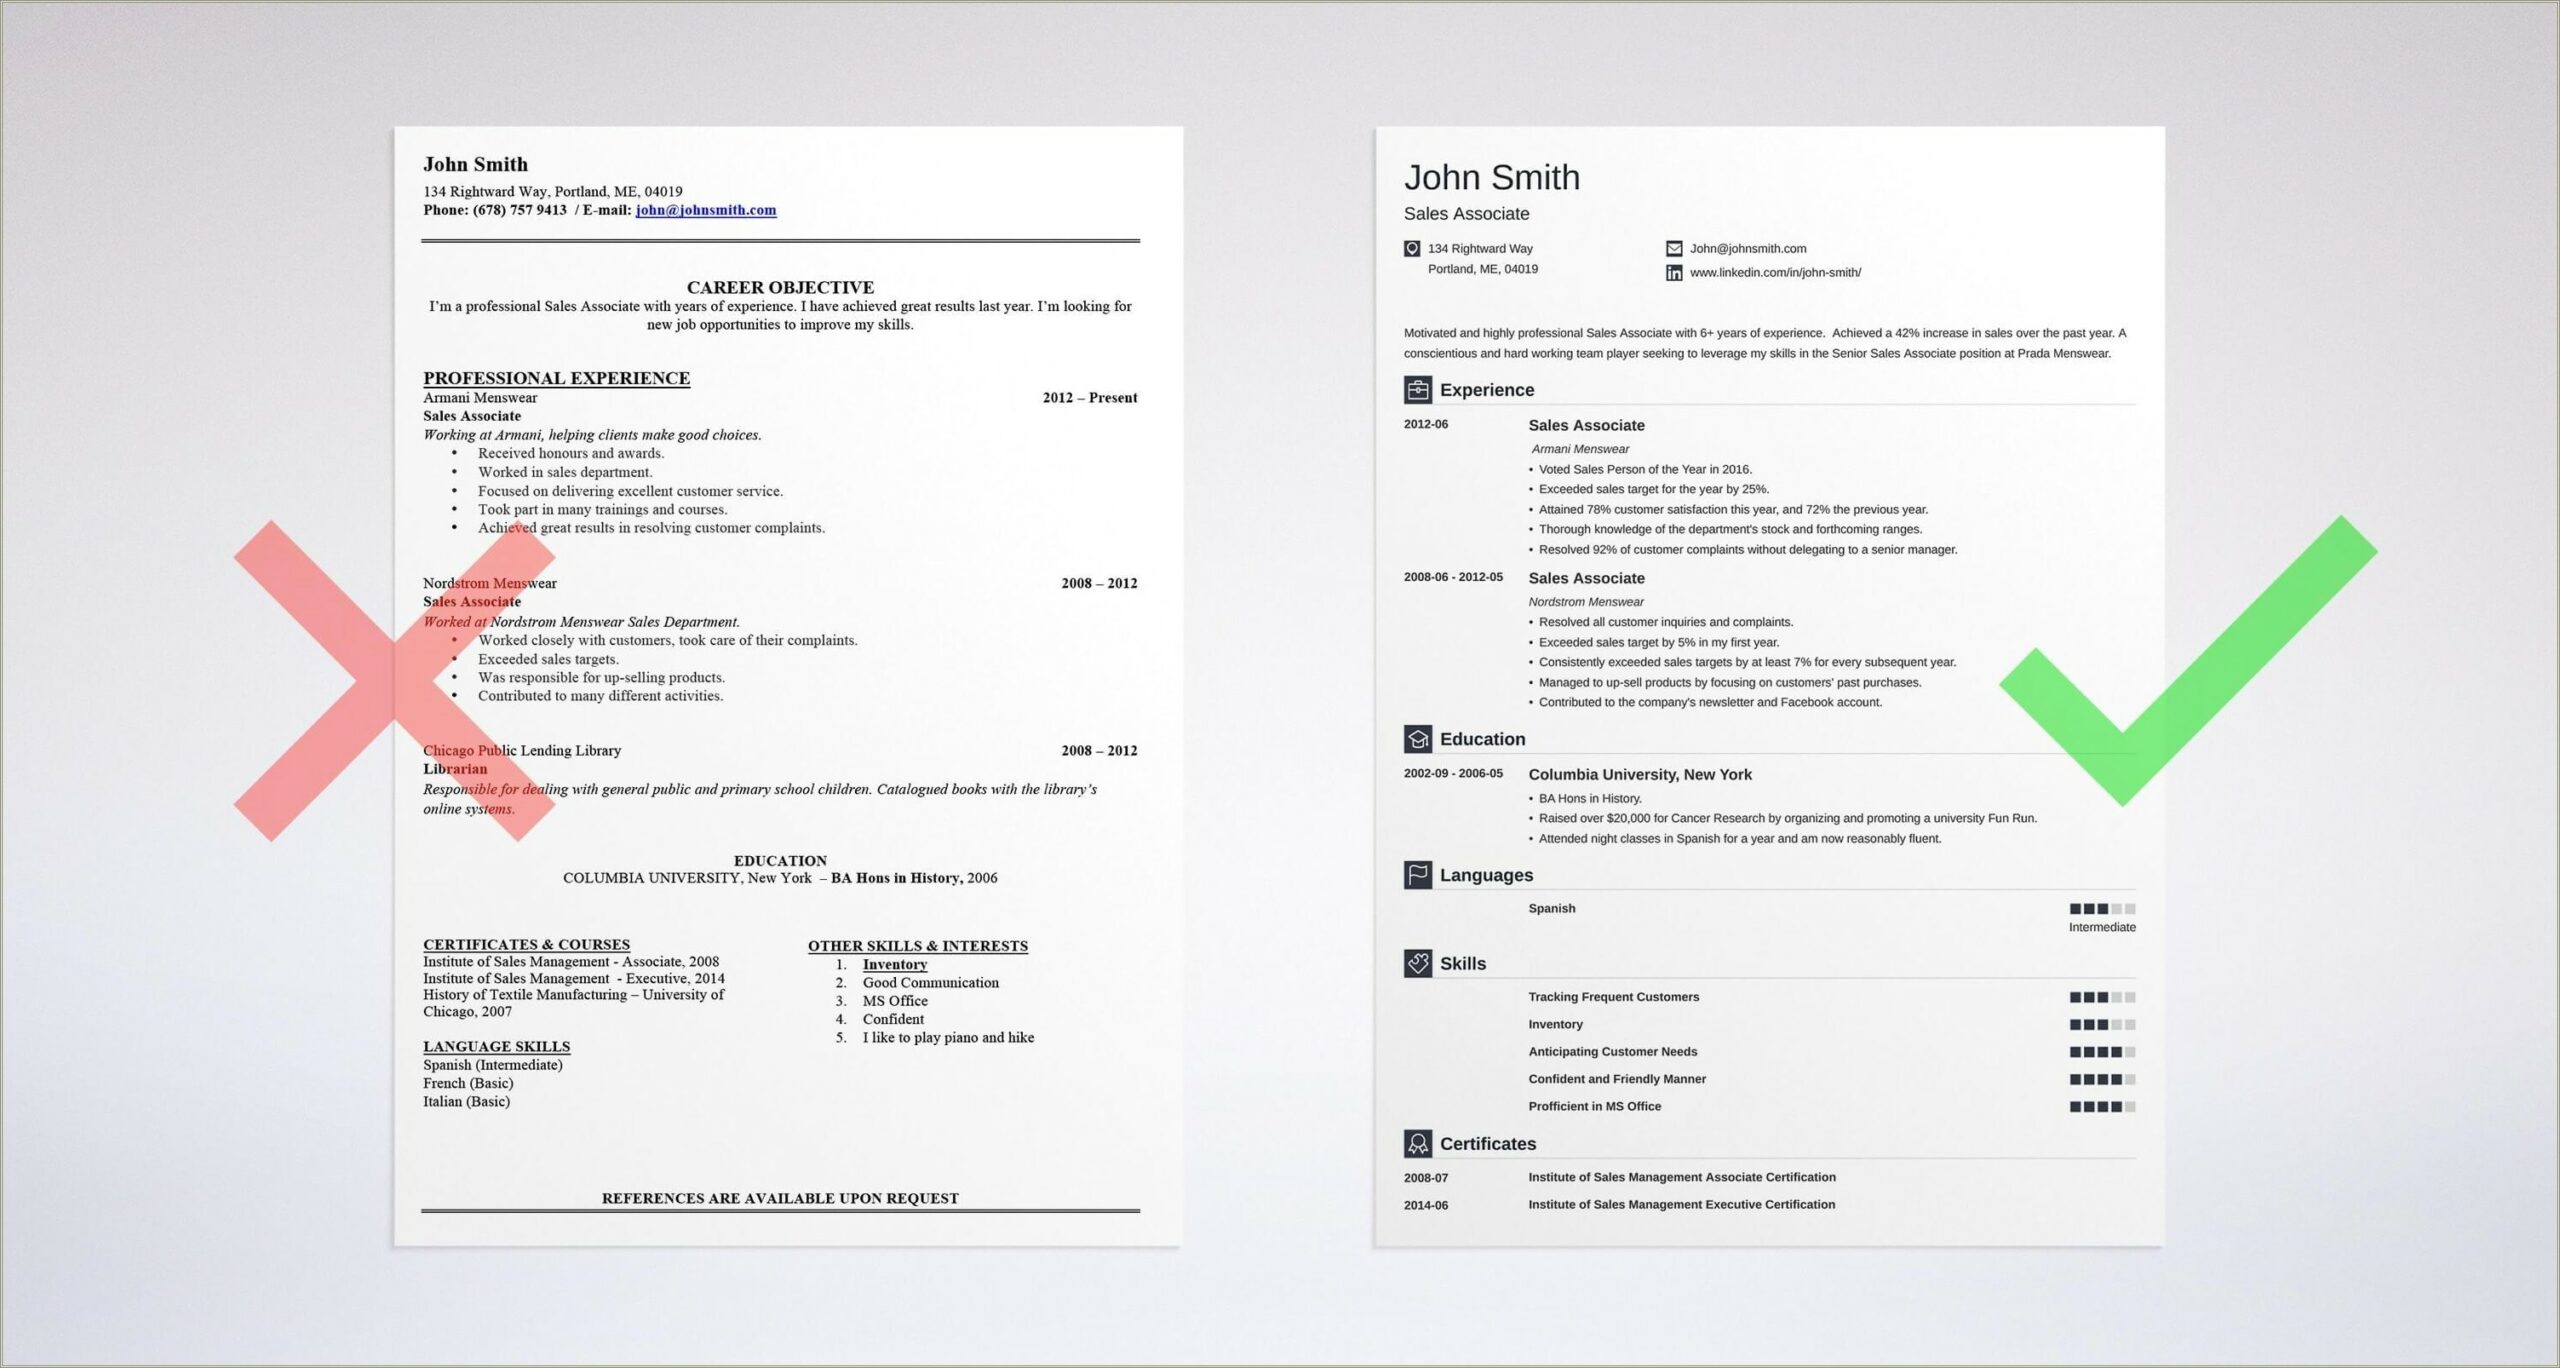 Examples Of Proffecional Summaries For A Resume